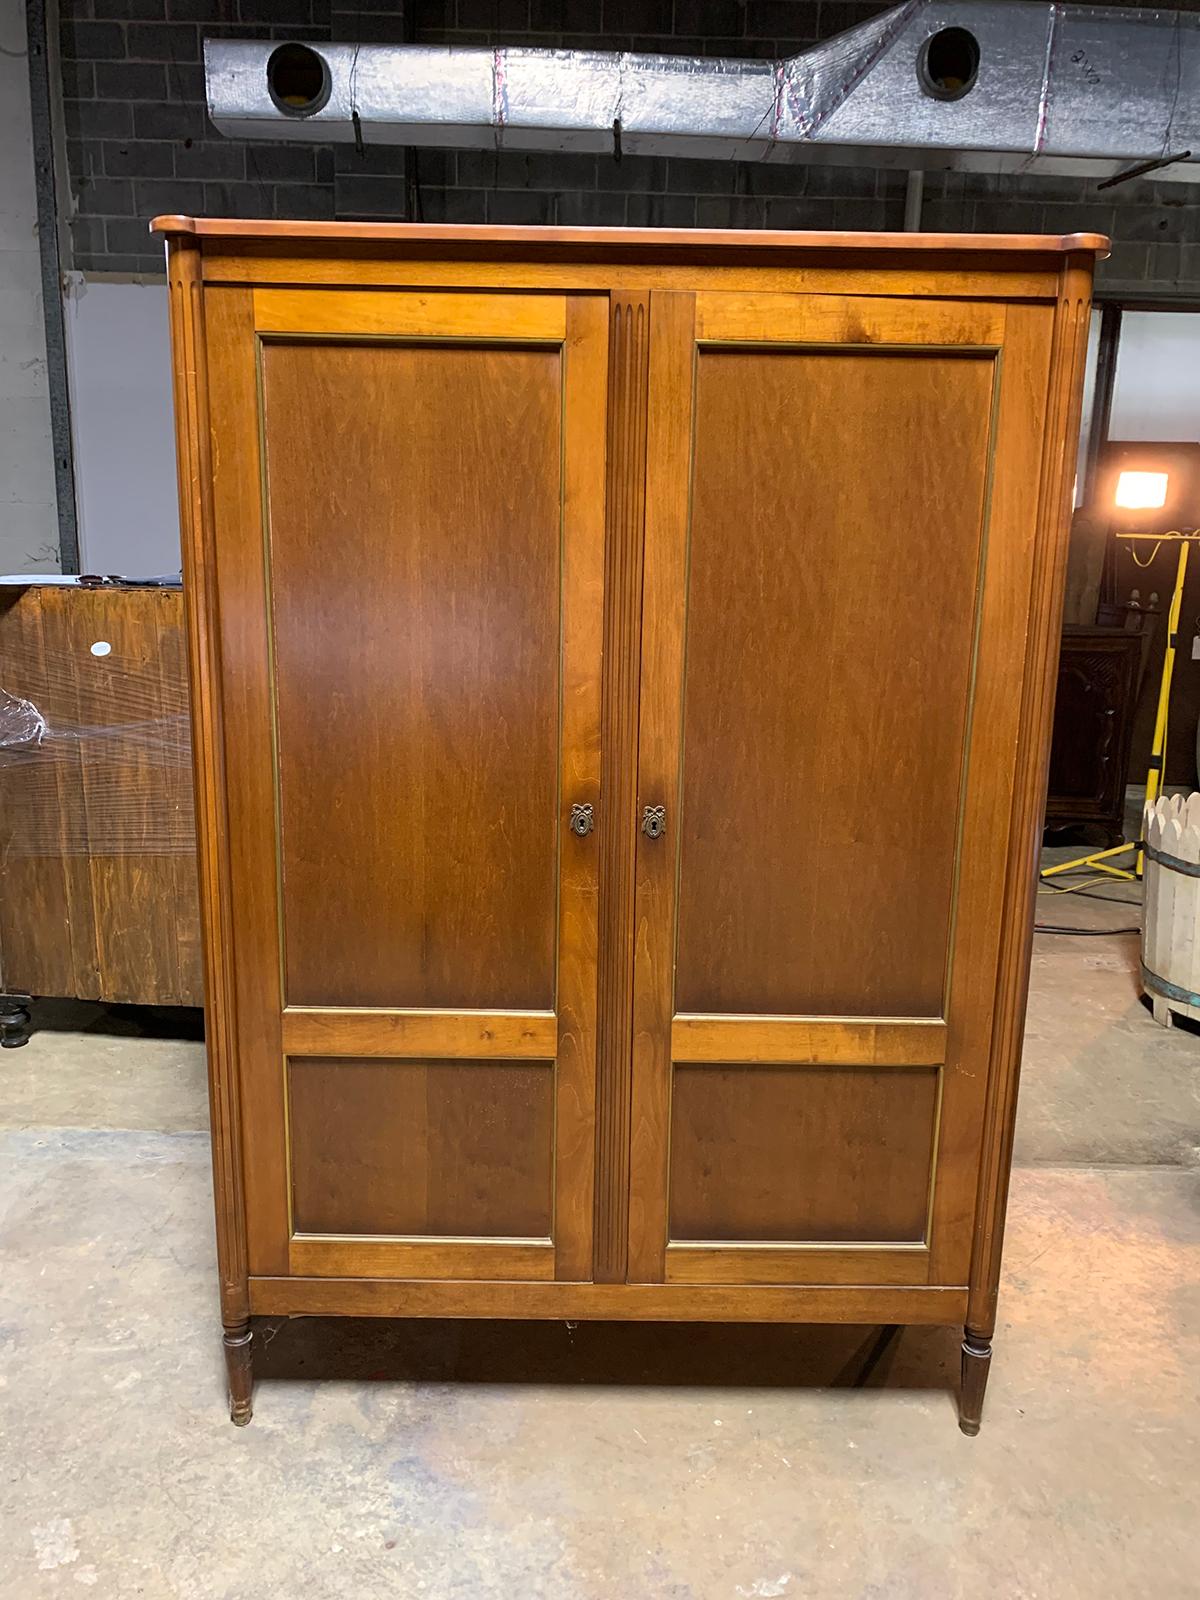 Maison Jansen style 20th century French fruitwood two-door cabinet.